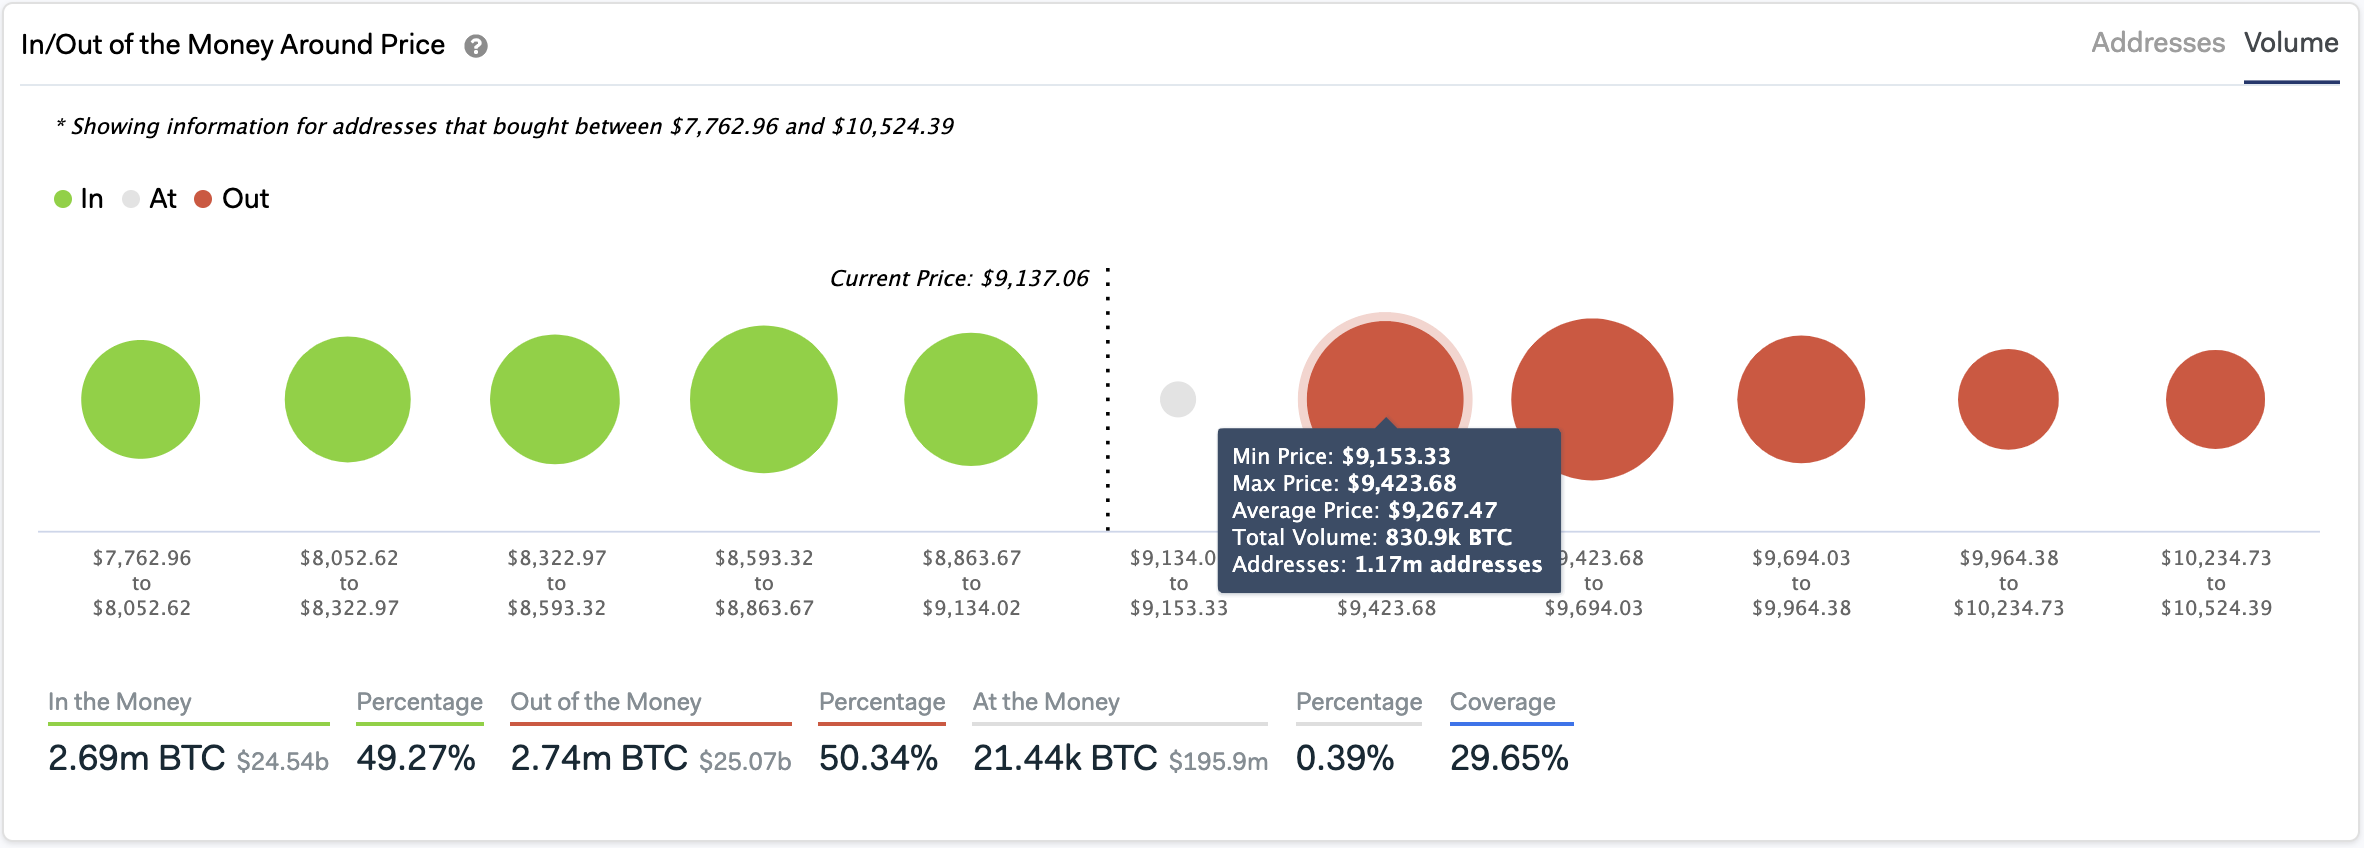 In/Out of the Money Around Price. (Source: IntoTheBlock)